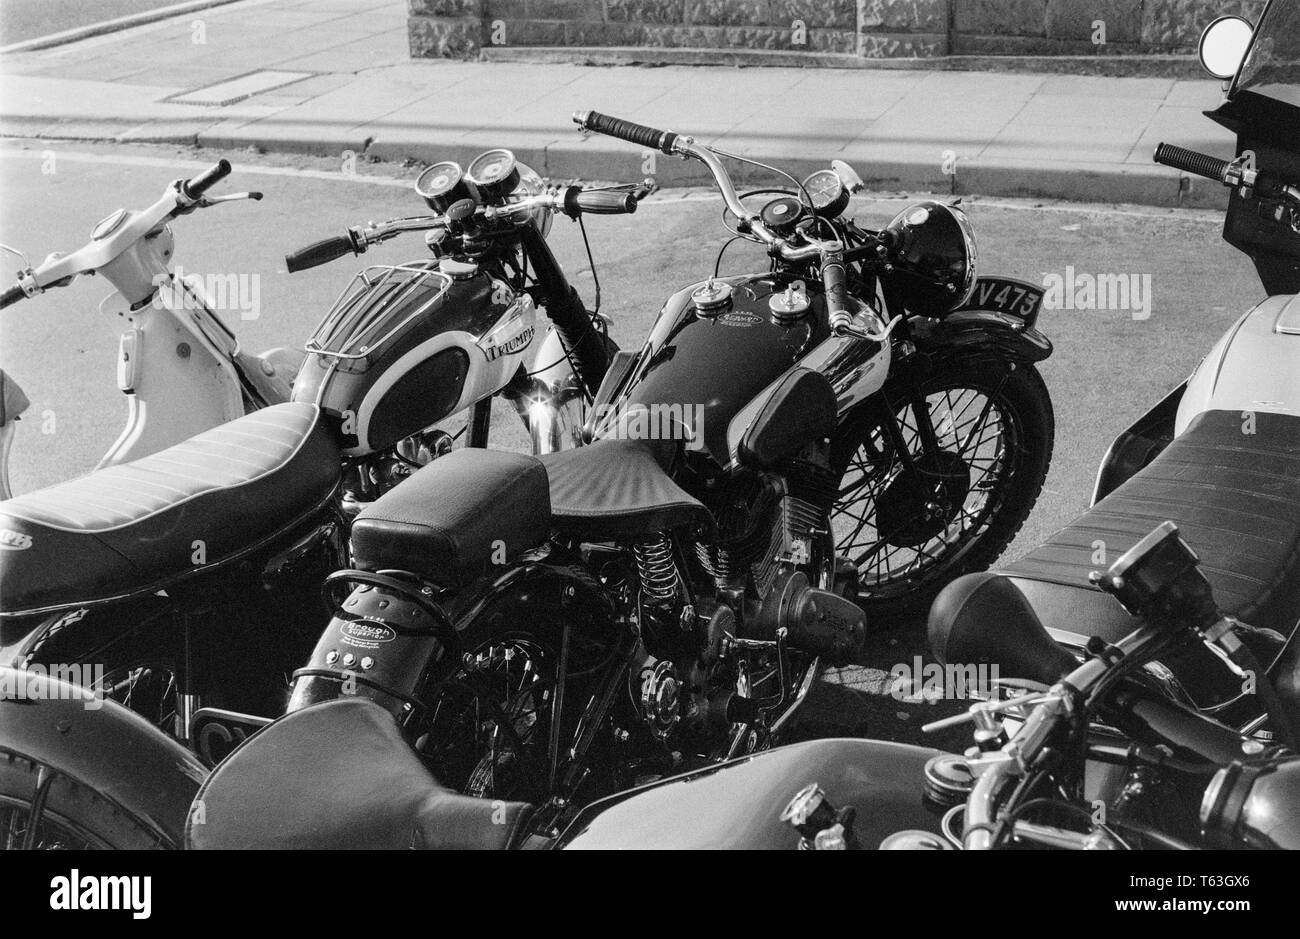 A black and white photograph taken in the 1970s showing details of a Brough Superior SS80 Motorcycle, and a Triumph Motorcycle, both classic British motorbikes. A moped can also be seen. Stock Photo